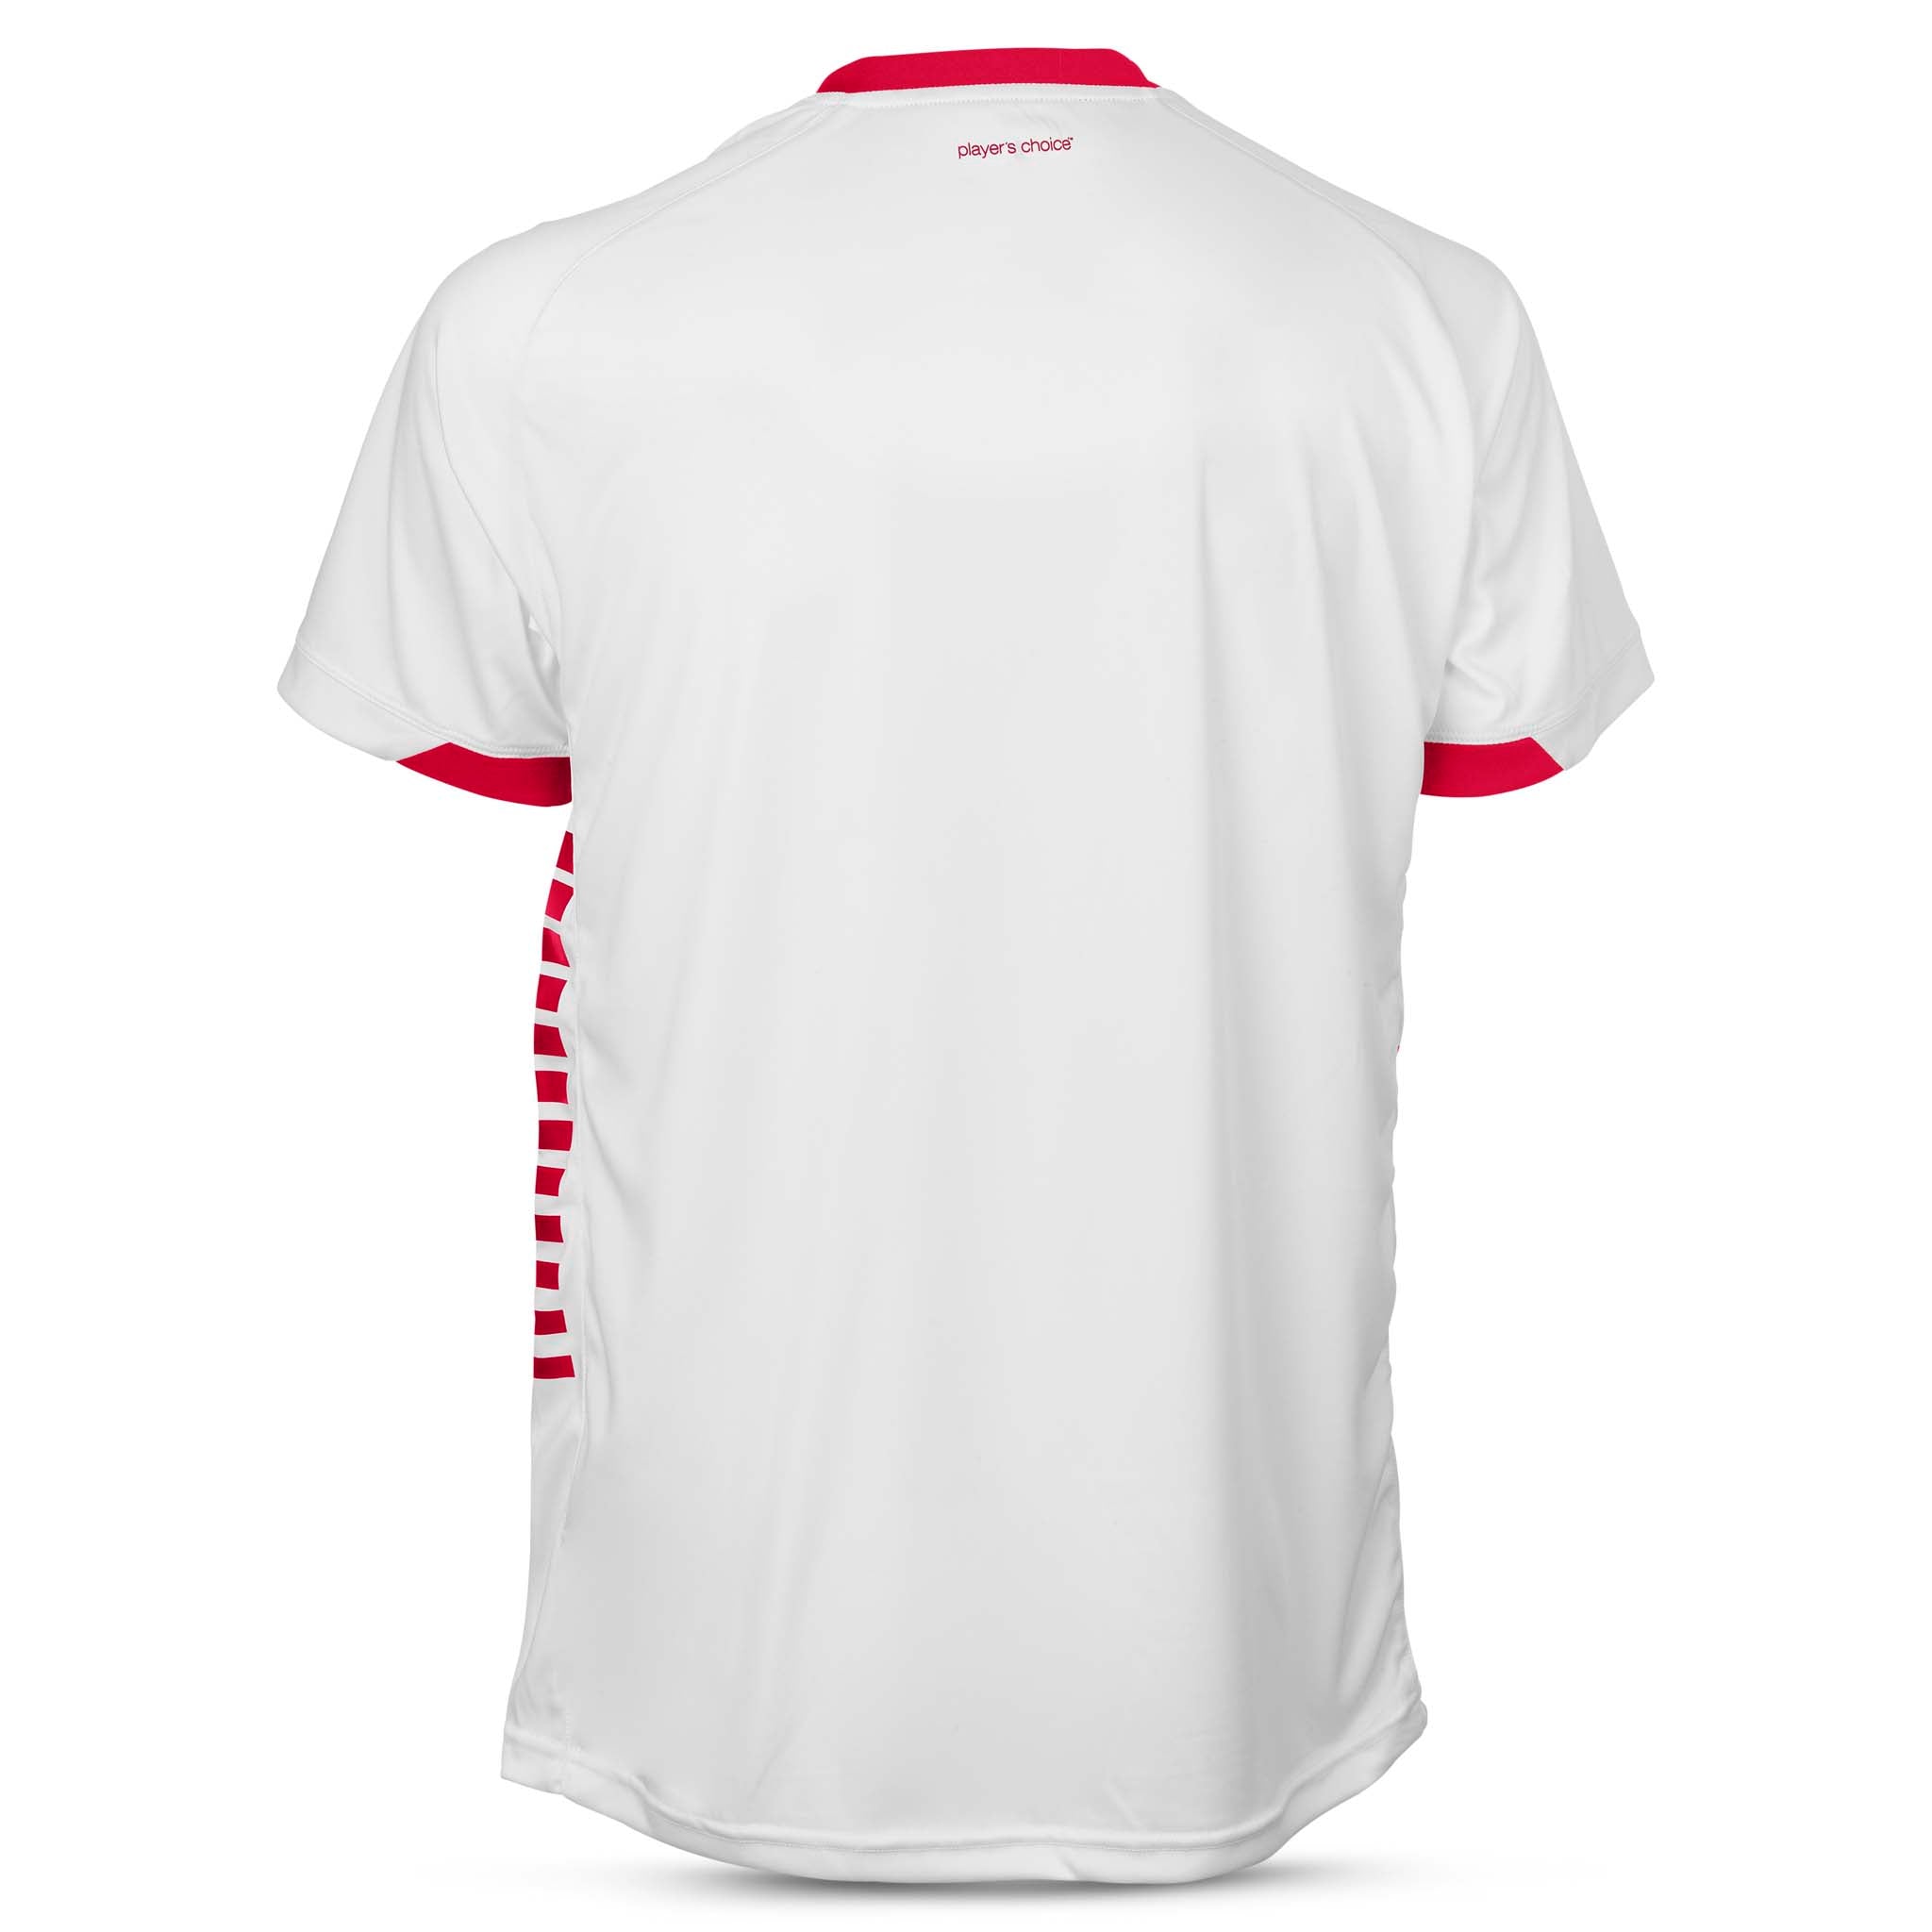 Spain Short Sleeve player shirt #colour_white/red #colour_white/red